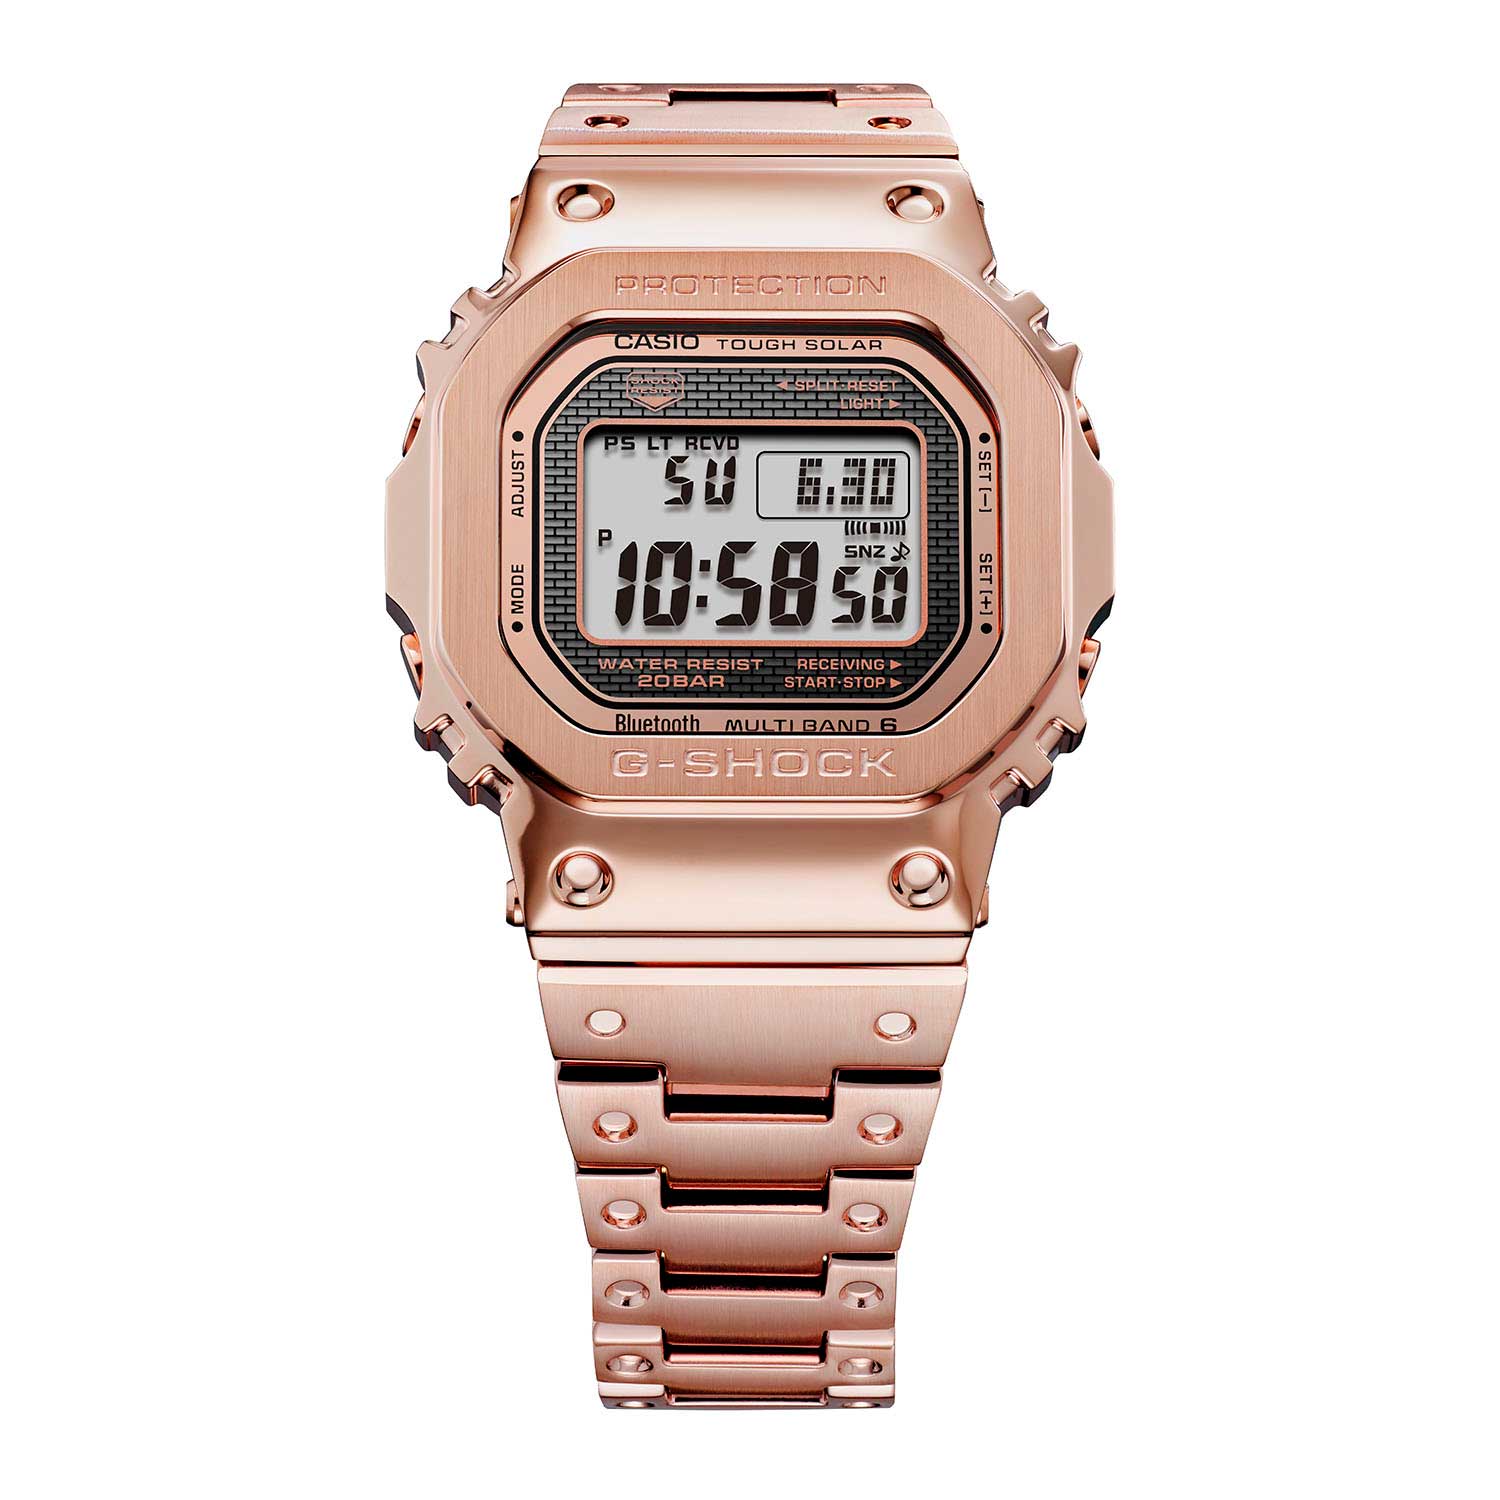 Introducing the Casio GMW-B5000GD-4 - Revolution